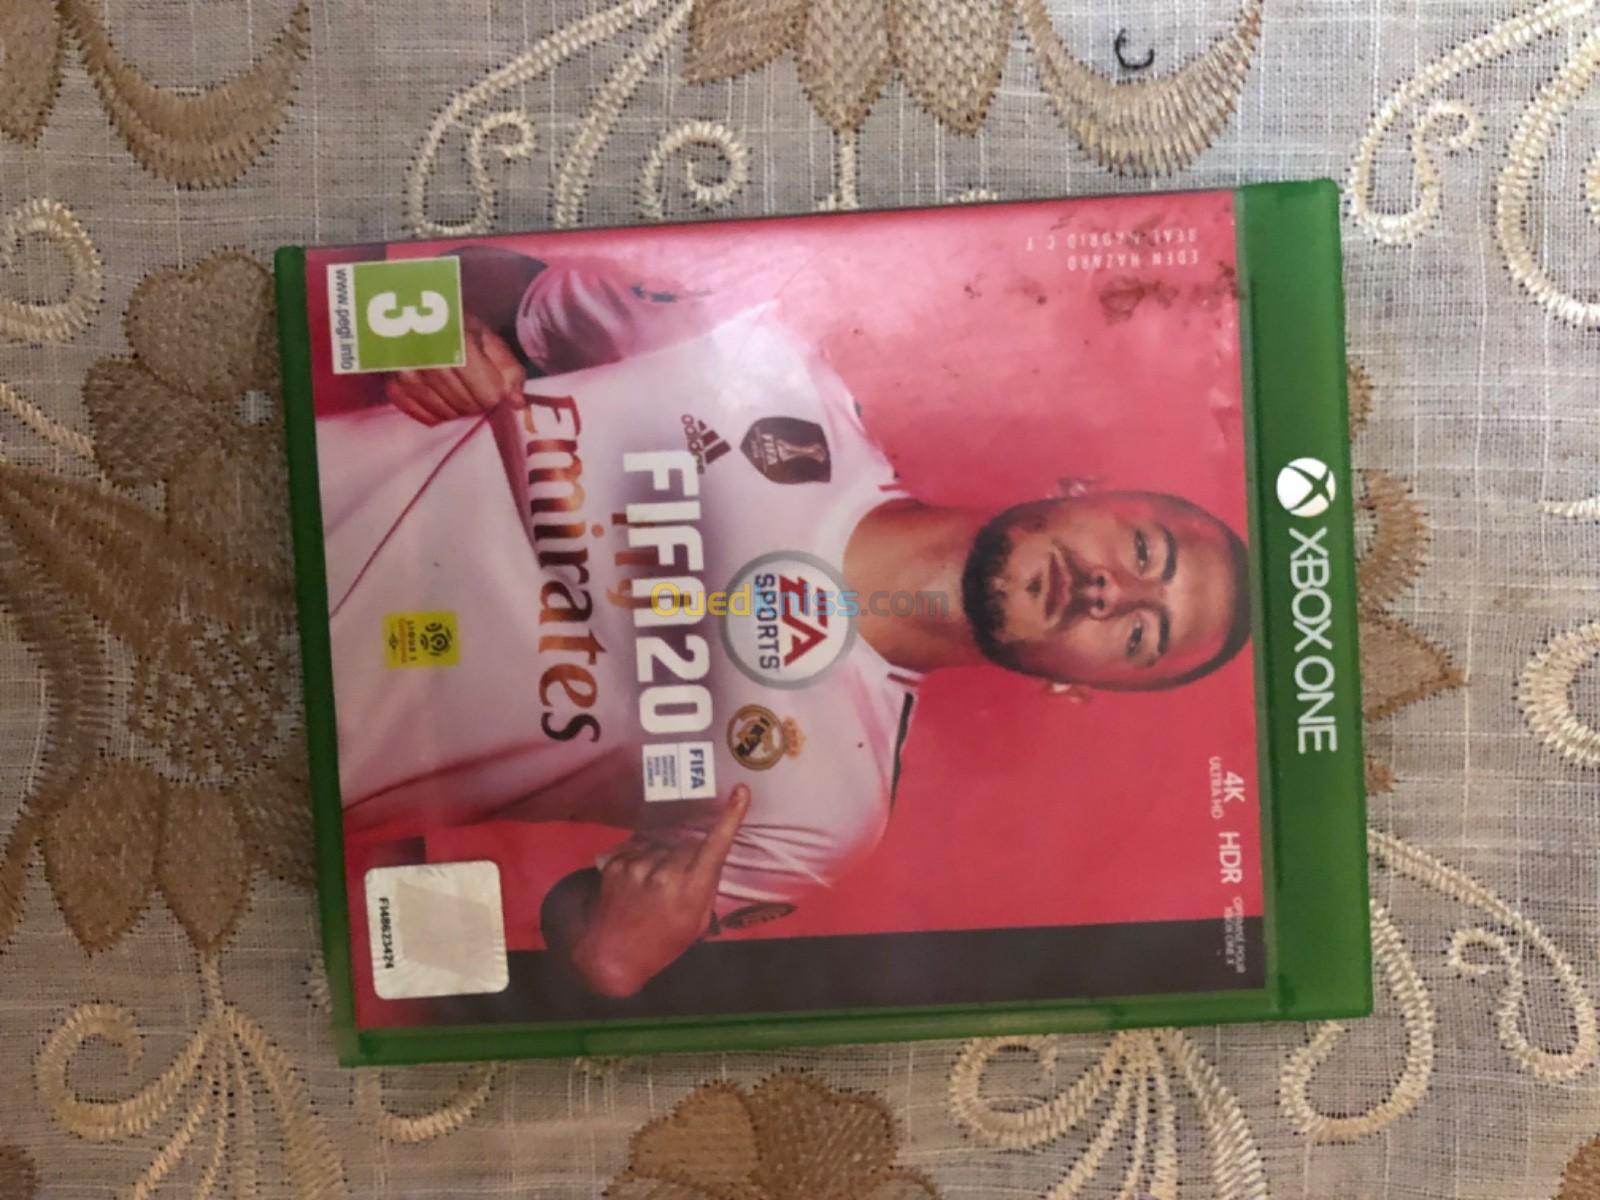 Cd fifa20 pour (xbox one x) et cd project car(xbox one